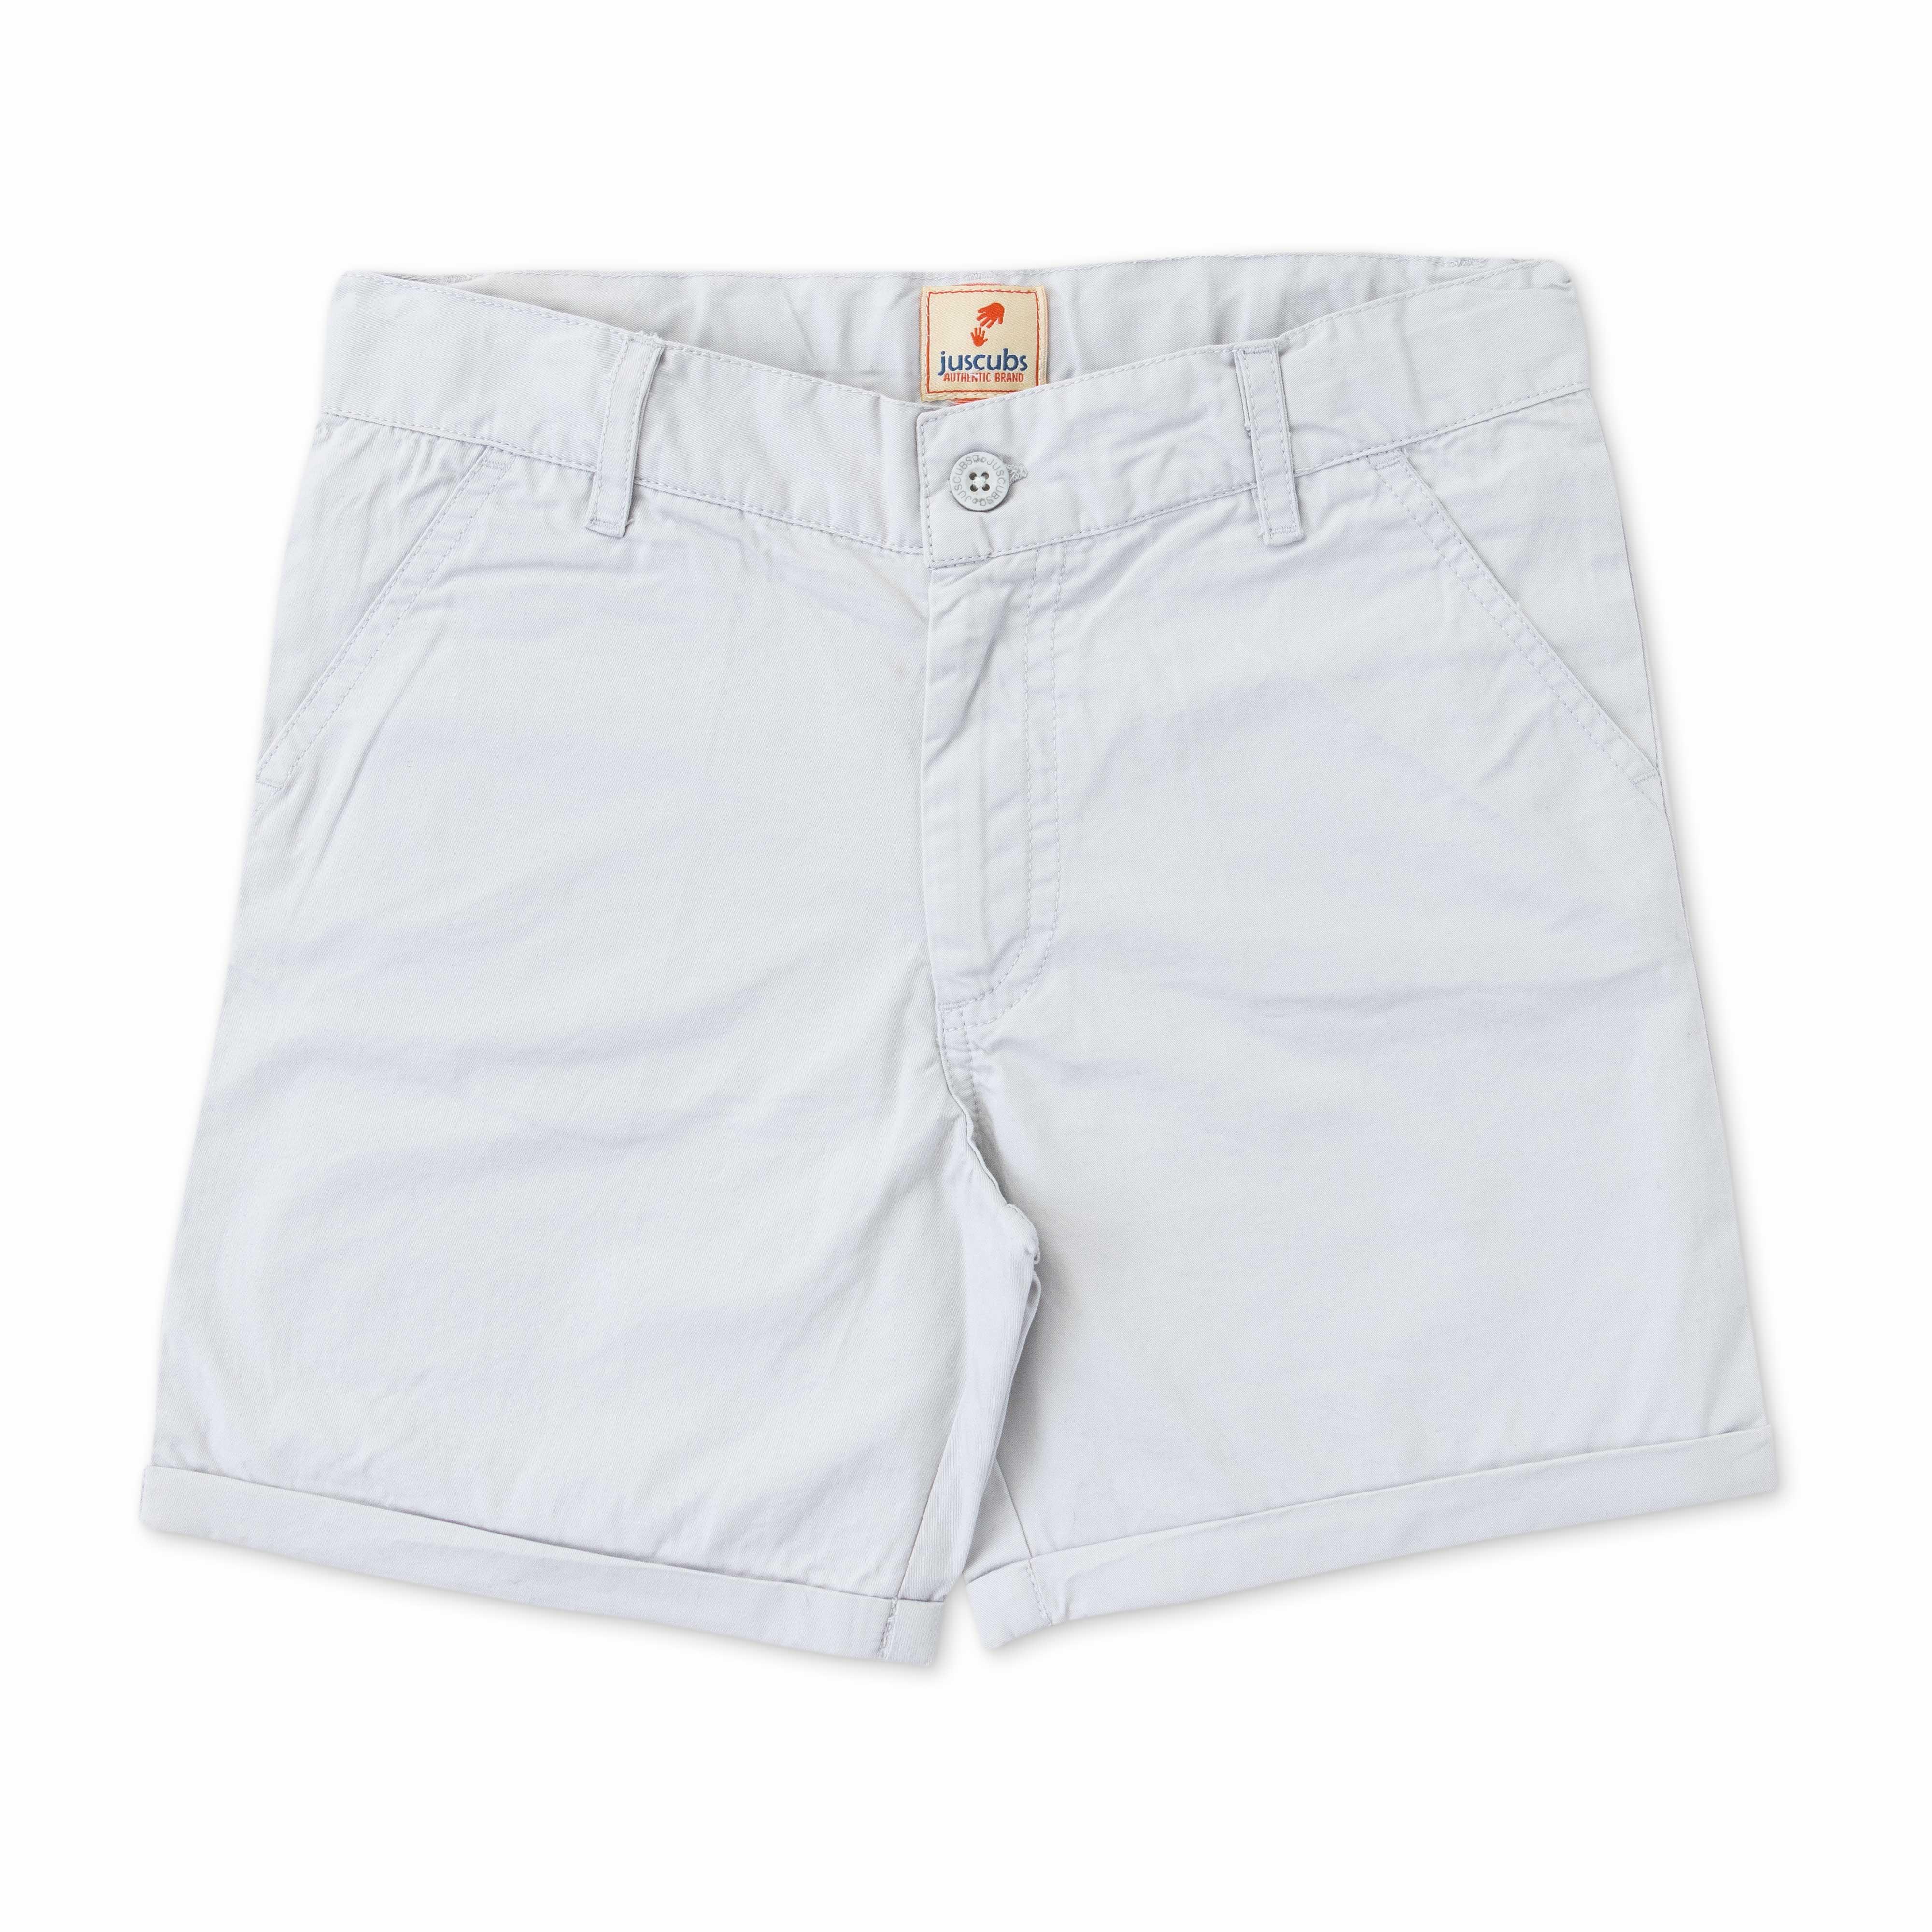 Boys Cotton Toddlers Solid Shorts - Grey - Juscubs